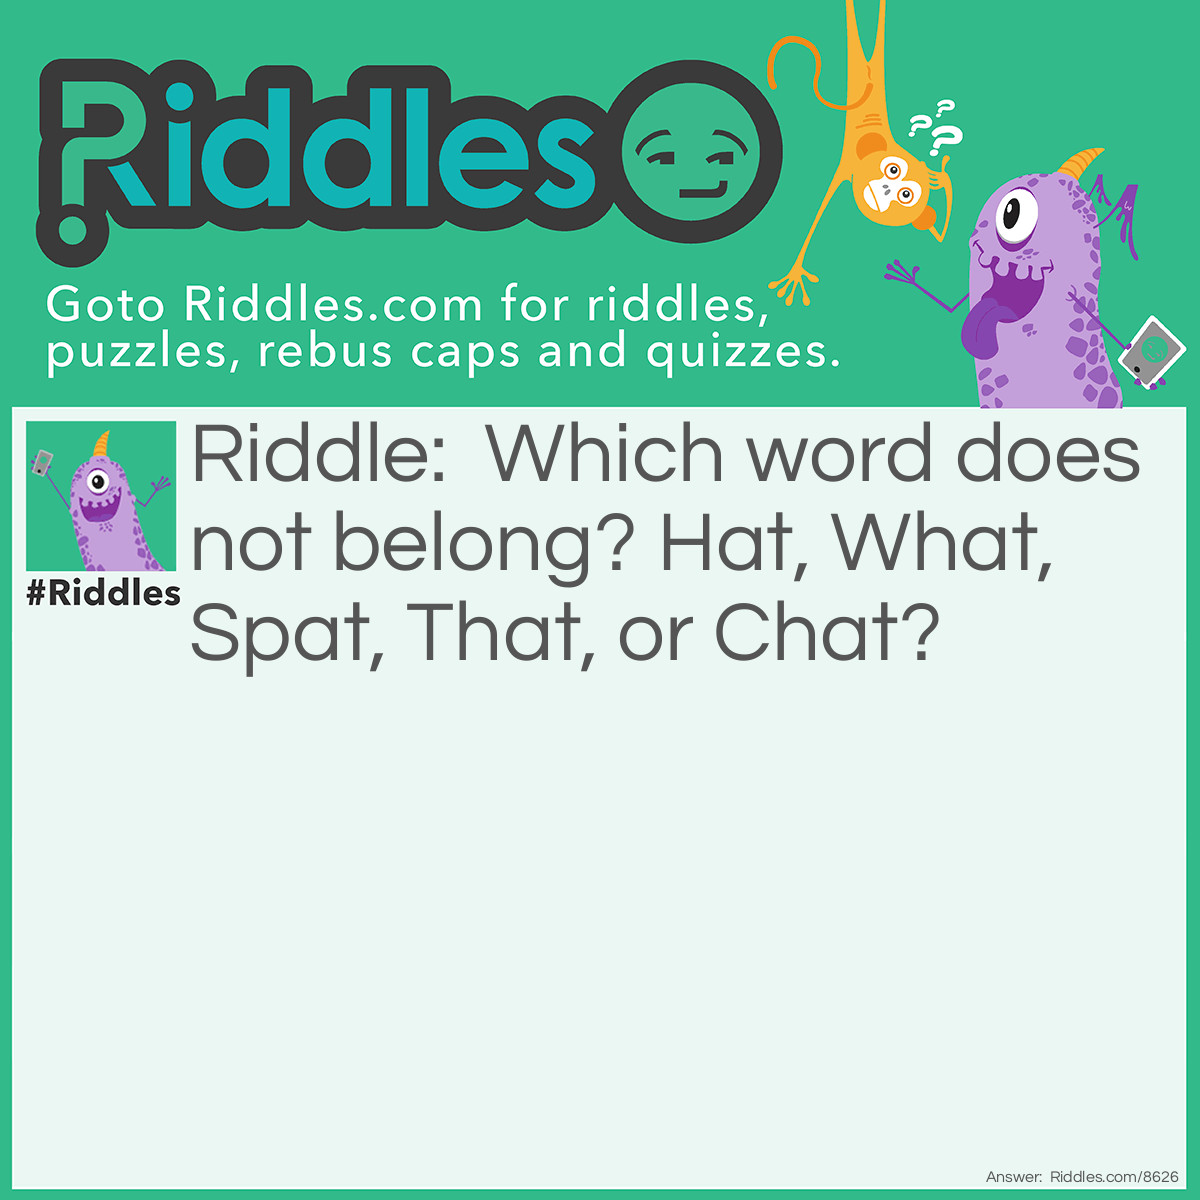 Riddle: Which word does not belong? Hat, What, Spat, That, or Chat? Answer: Spat! all of the words have HAT in them except Spat.❤️